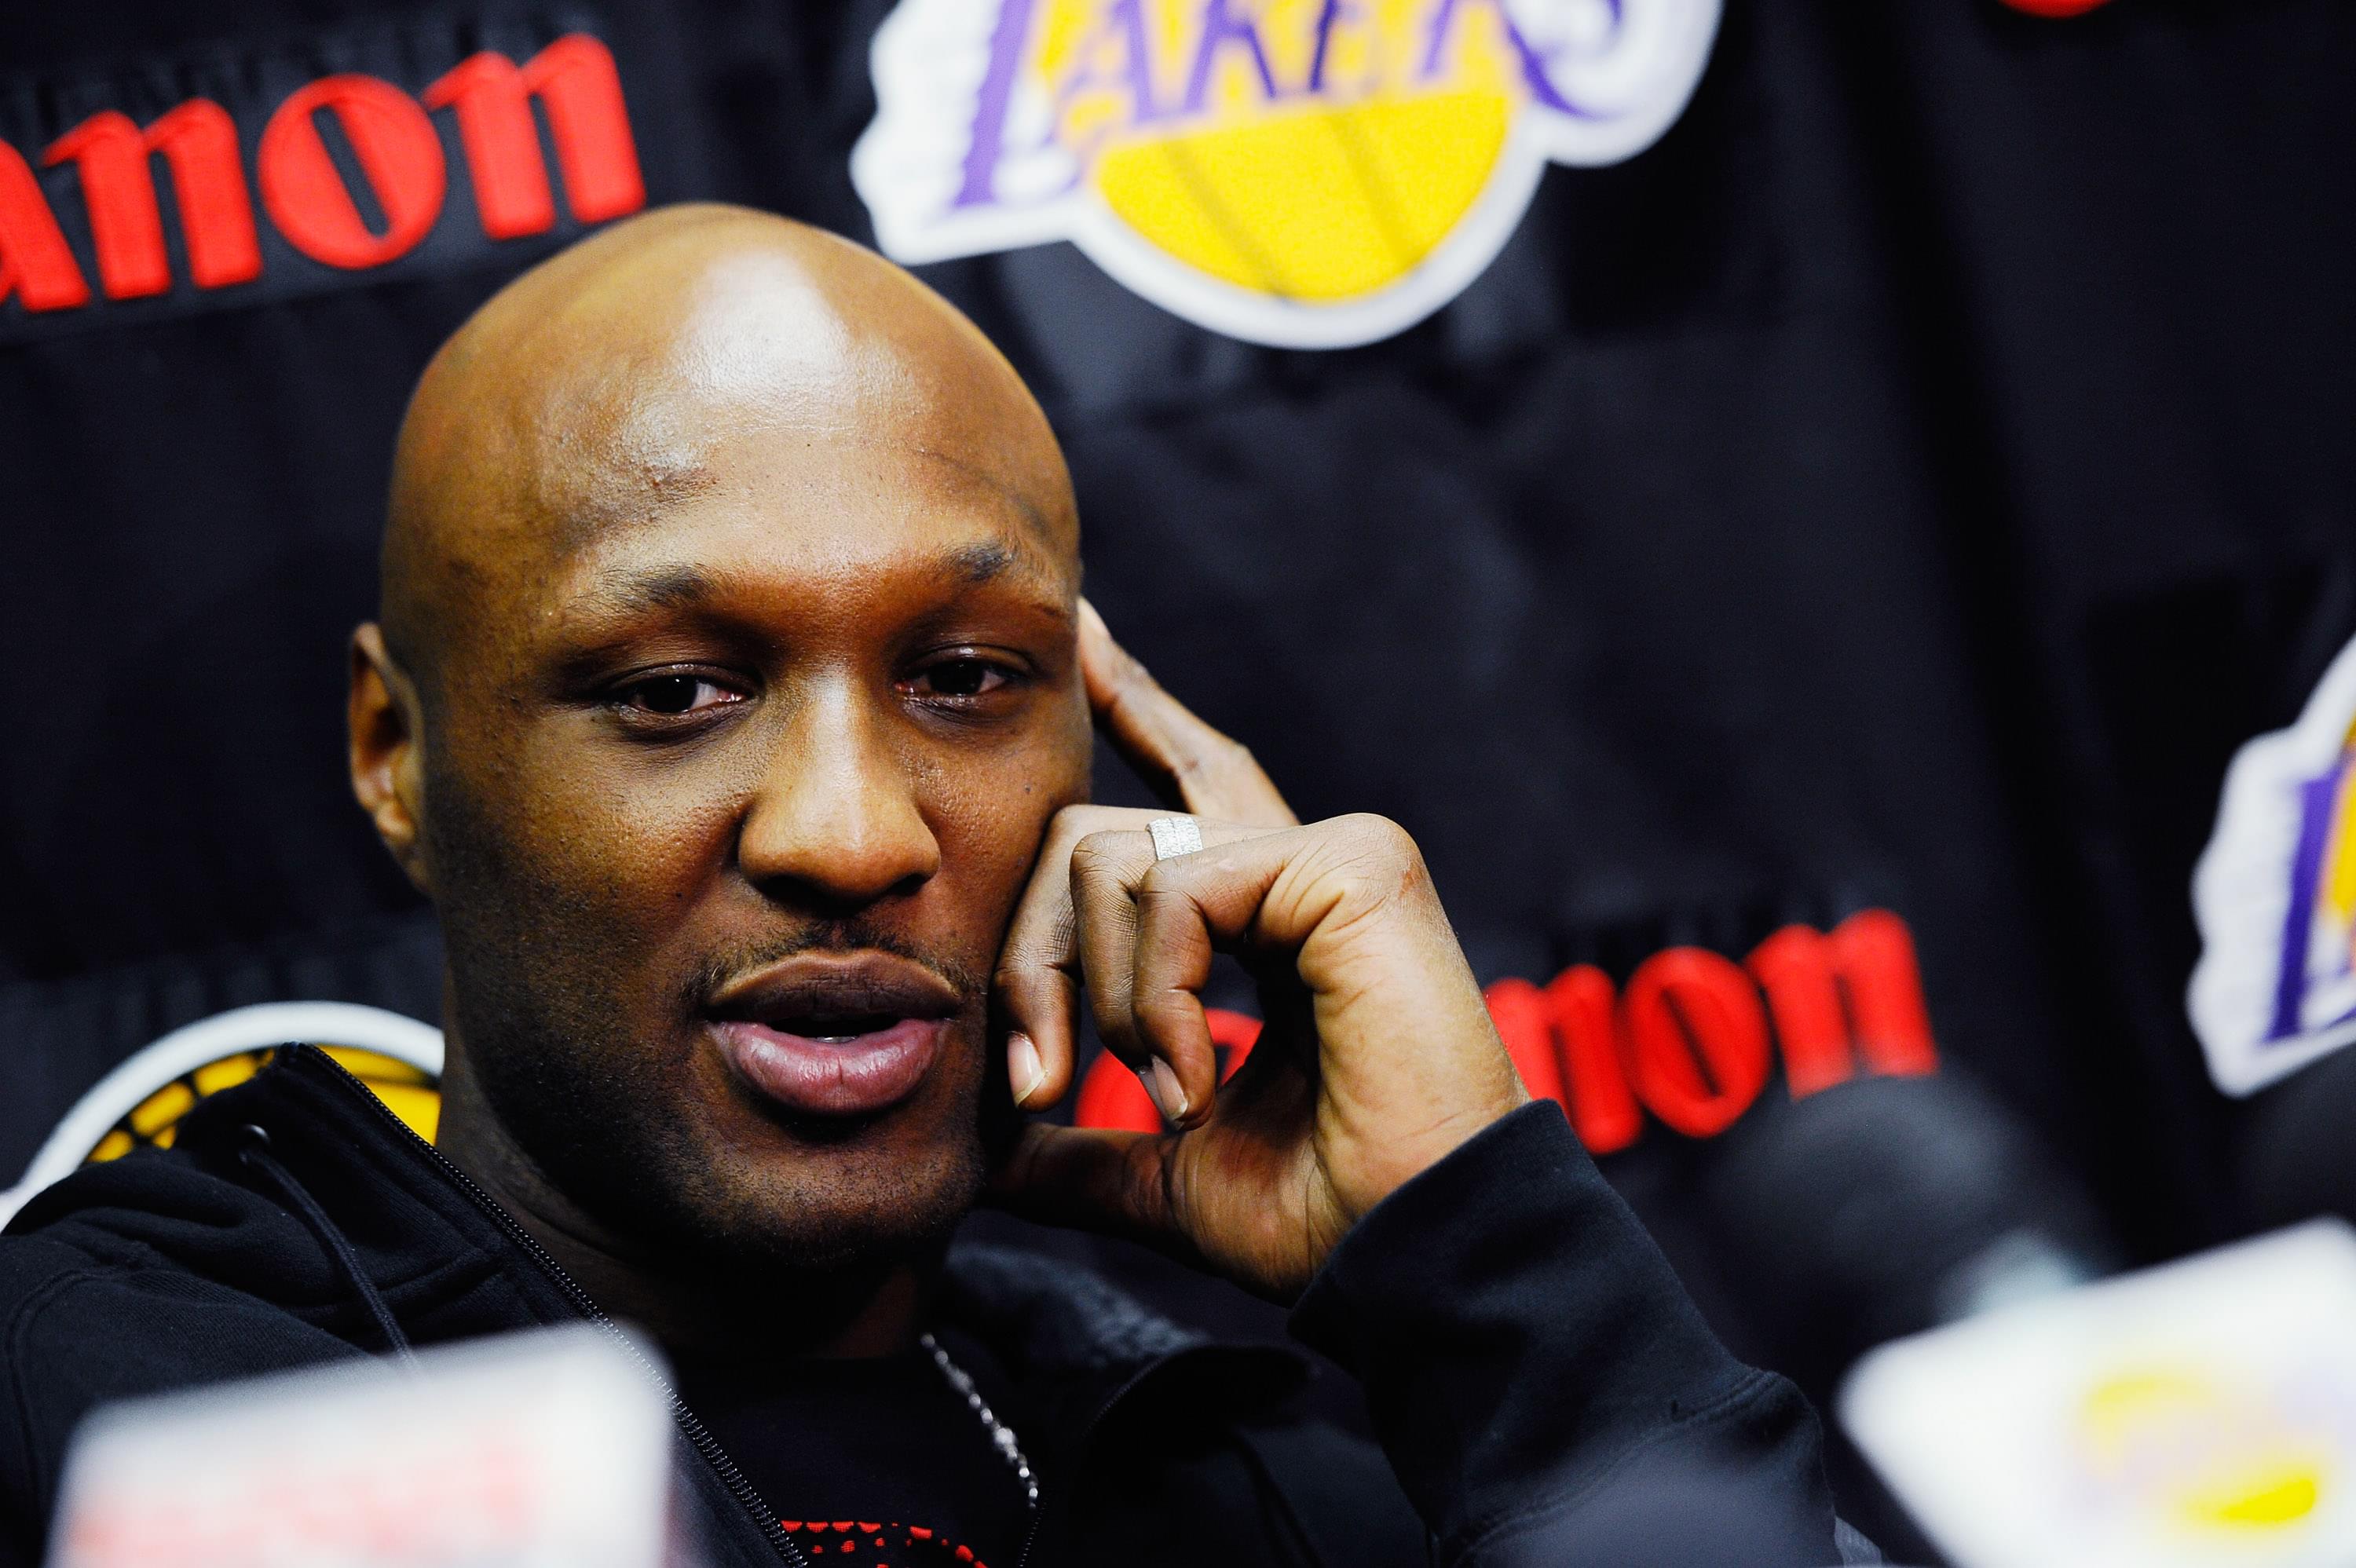 Lamar Odom Announces He’ll Play Basketball in China